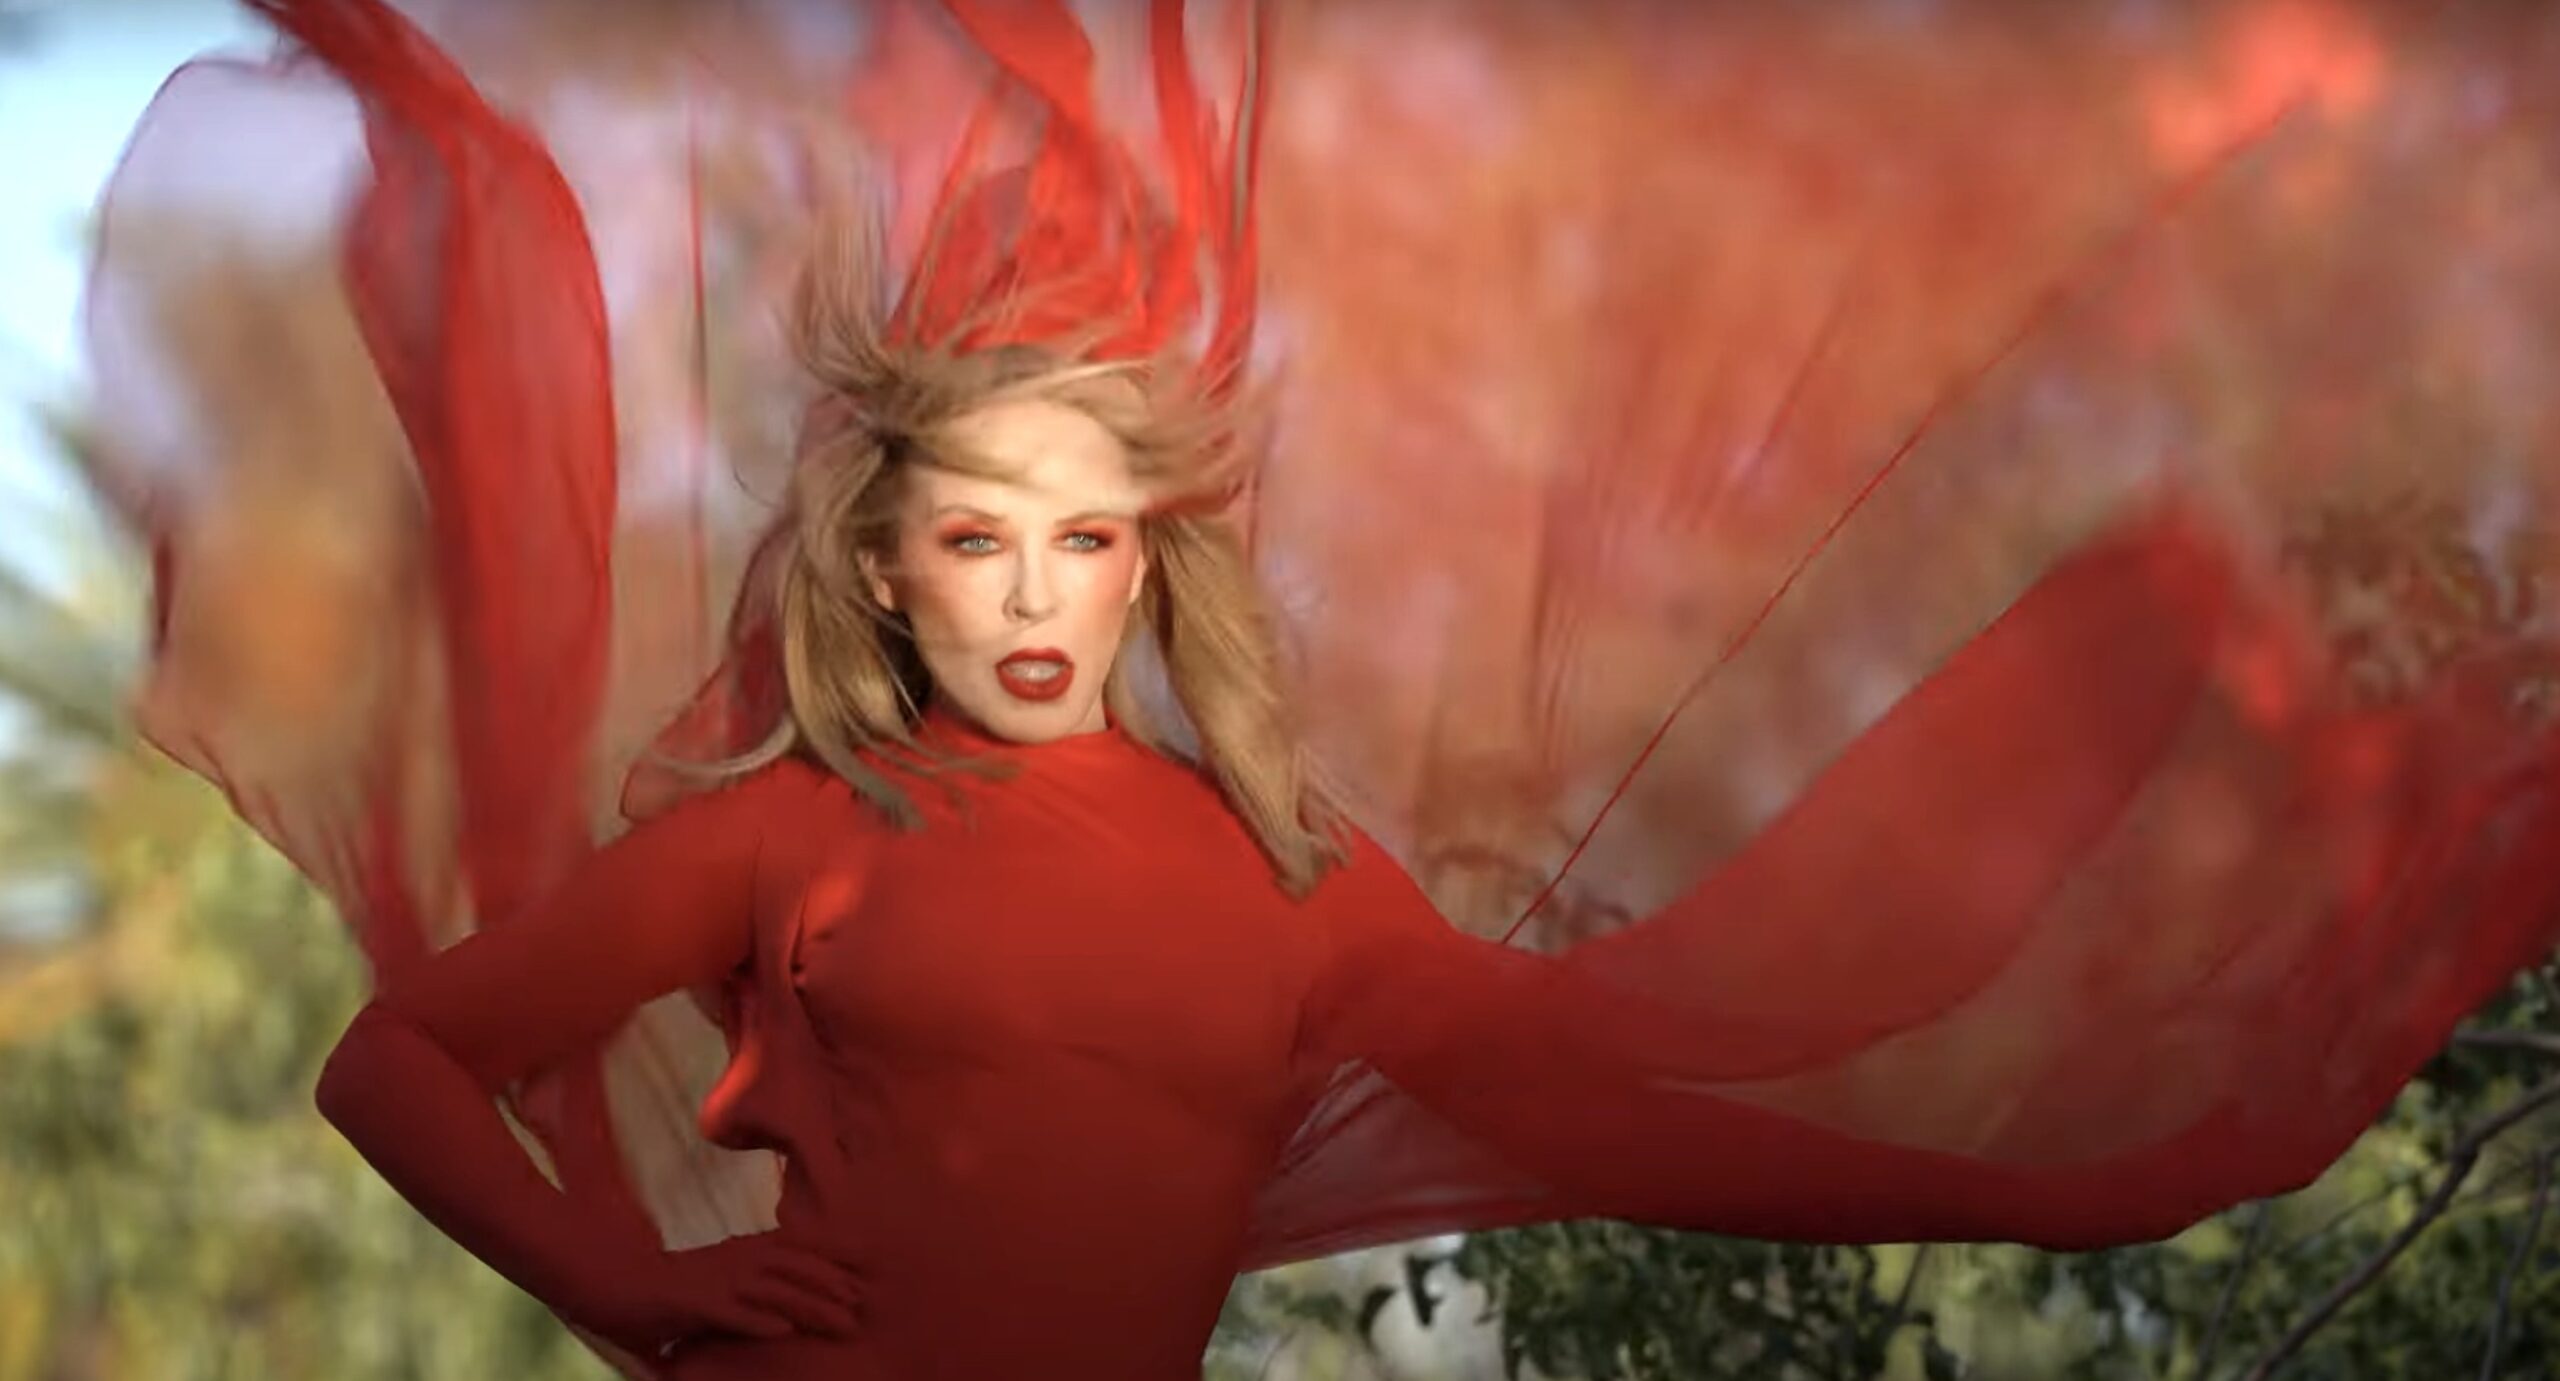 Kylie Minogue Makes HISTORY As ‘Padam Padam’ Goes Top 10 in the UK